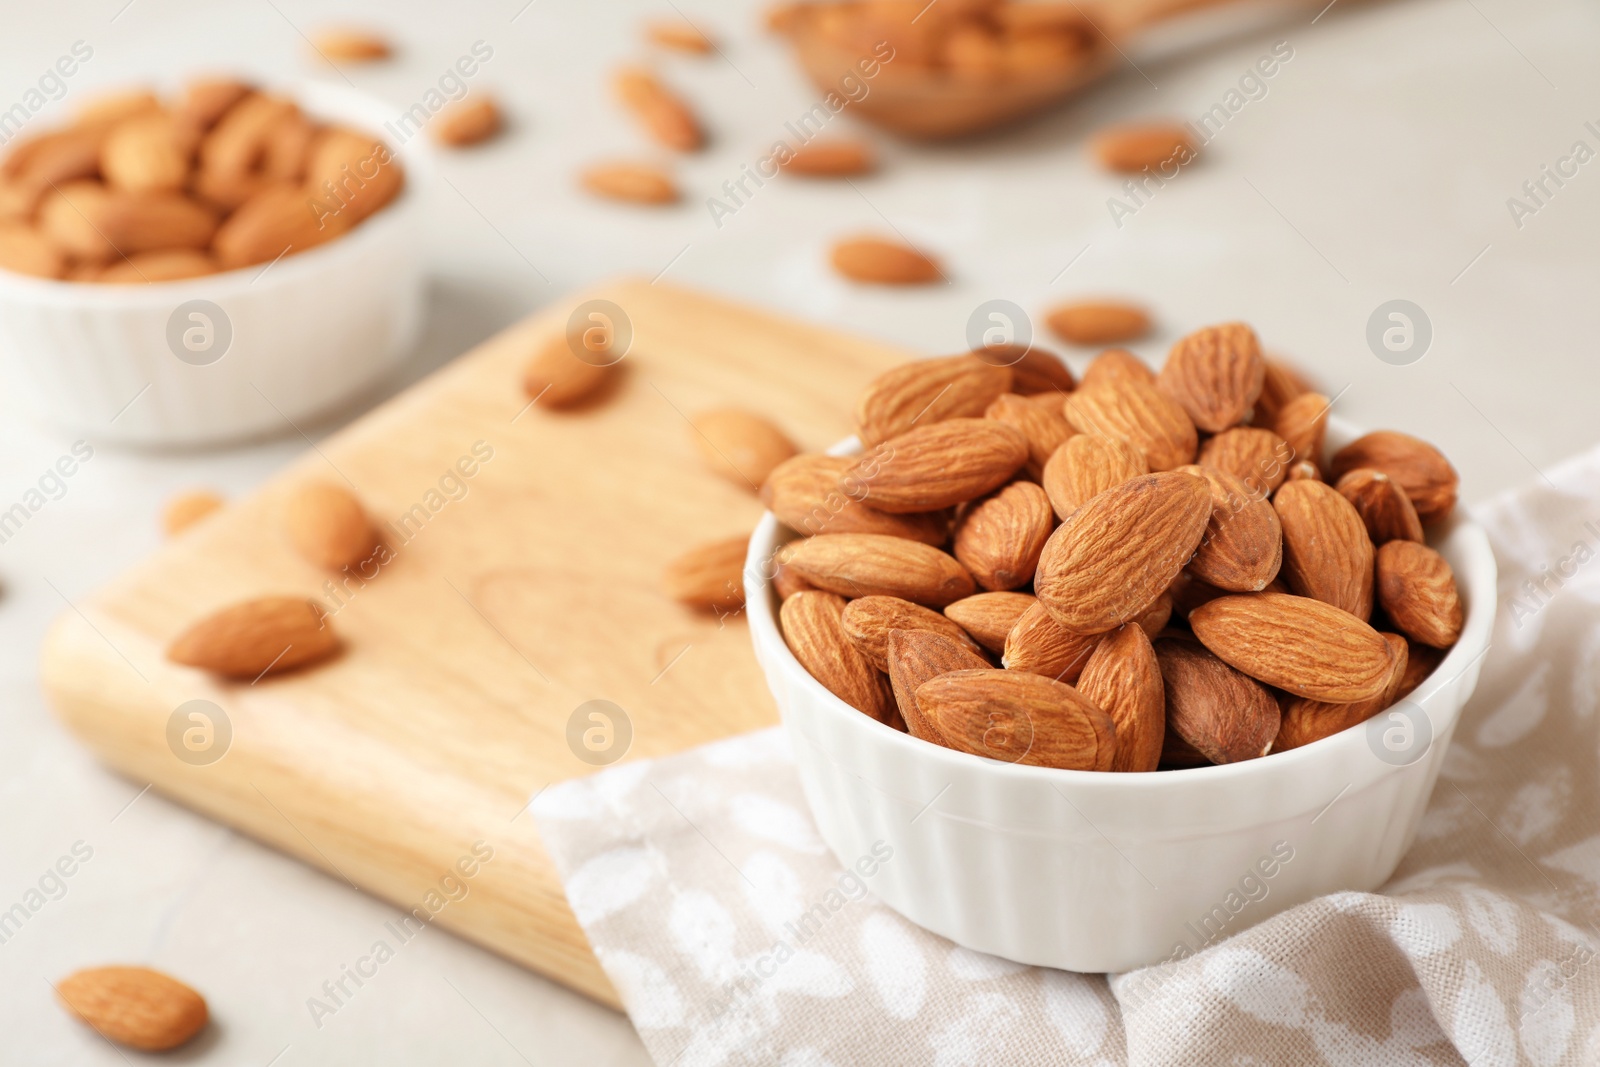 Photo of Wooden board with tasty organic almond nuts in bowl on table. Space for text